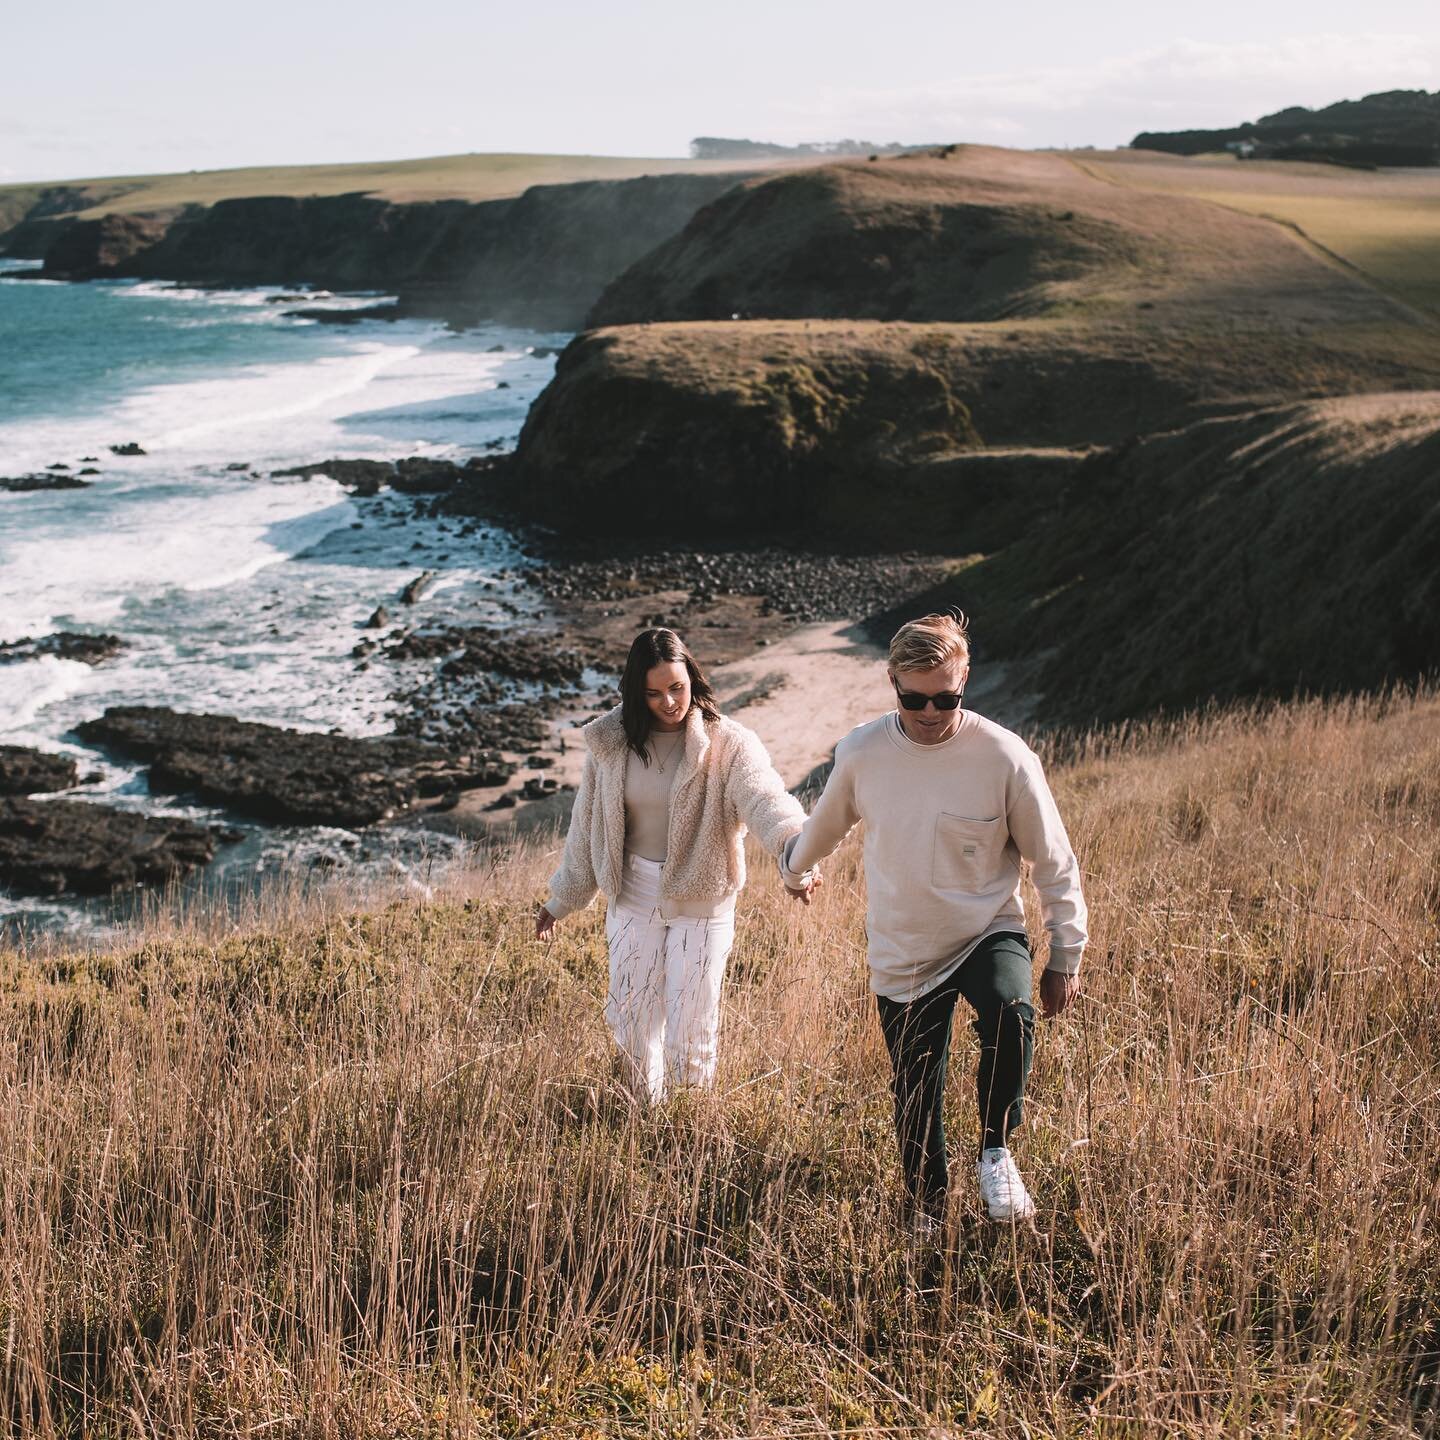 Madison n Hayden taking the gorgeous hike on the Cairns Bay Cliff in Mornington. A beautiful sunny day filled with love and light

.
.
.
.⠀
.⠀
.⠀
.⠀
#loveislove#chasinglight#makemoments#lookslikefilm#theknot#loverly#kinfolk#icatching#ig_myshot#ivoryt